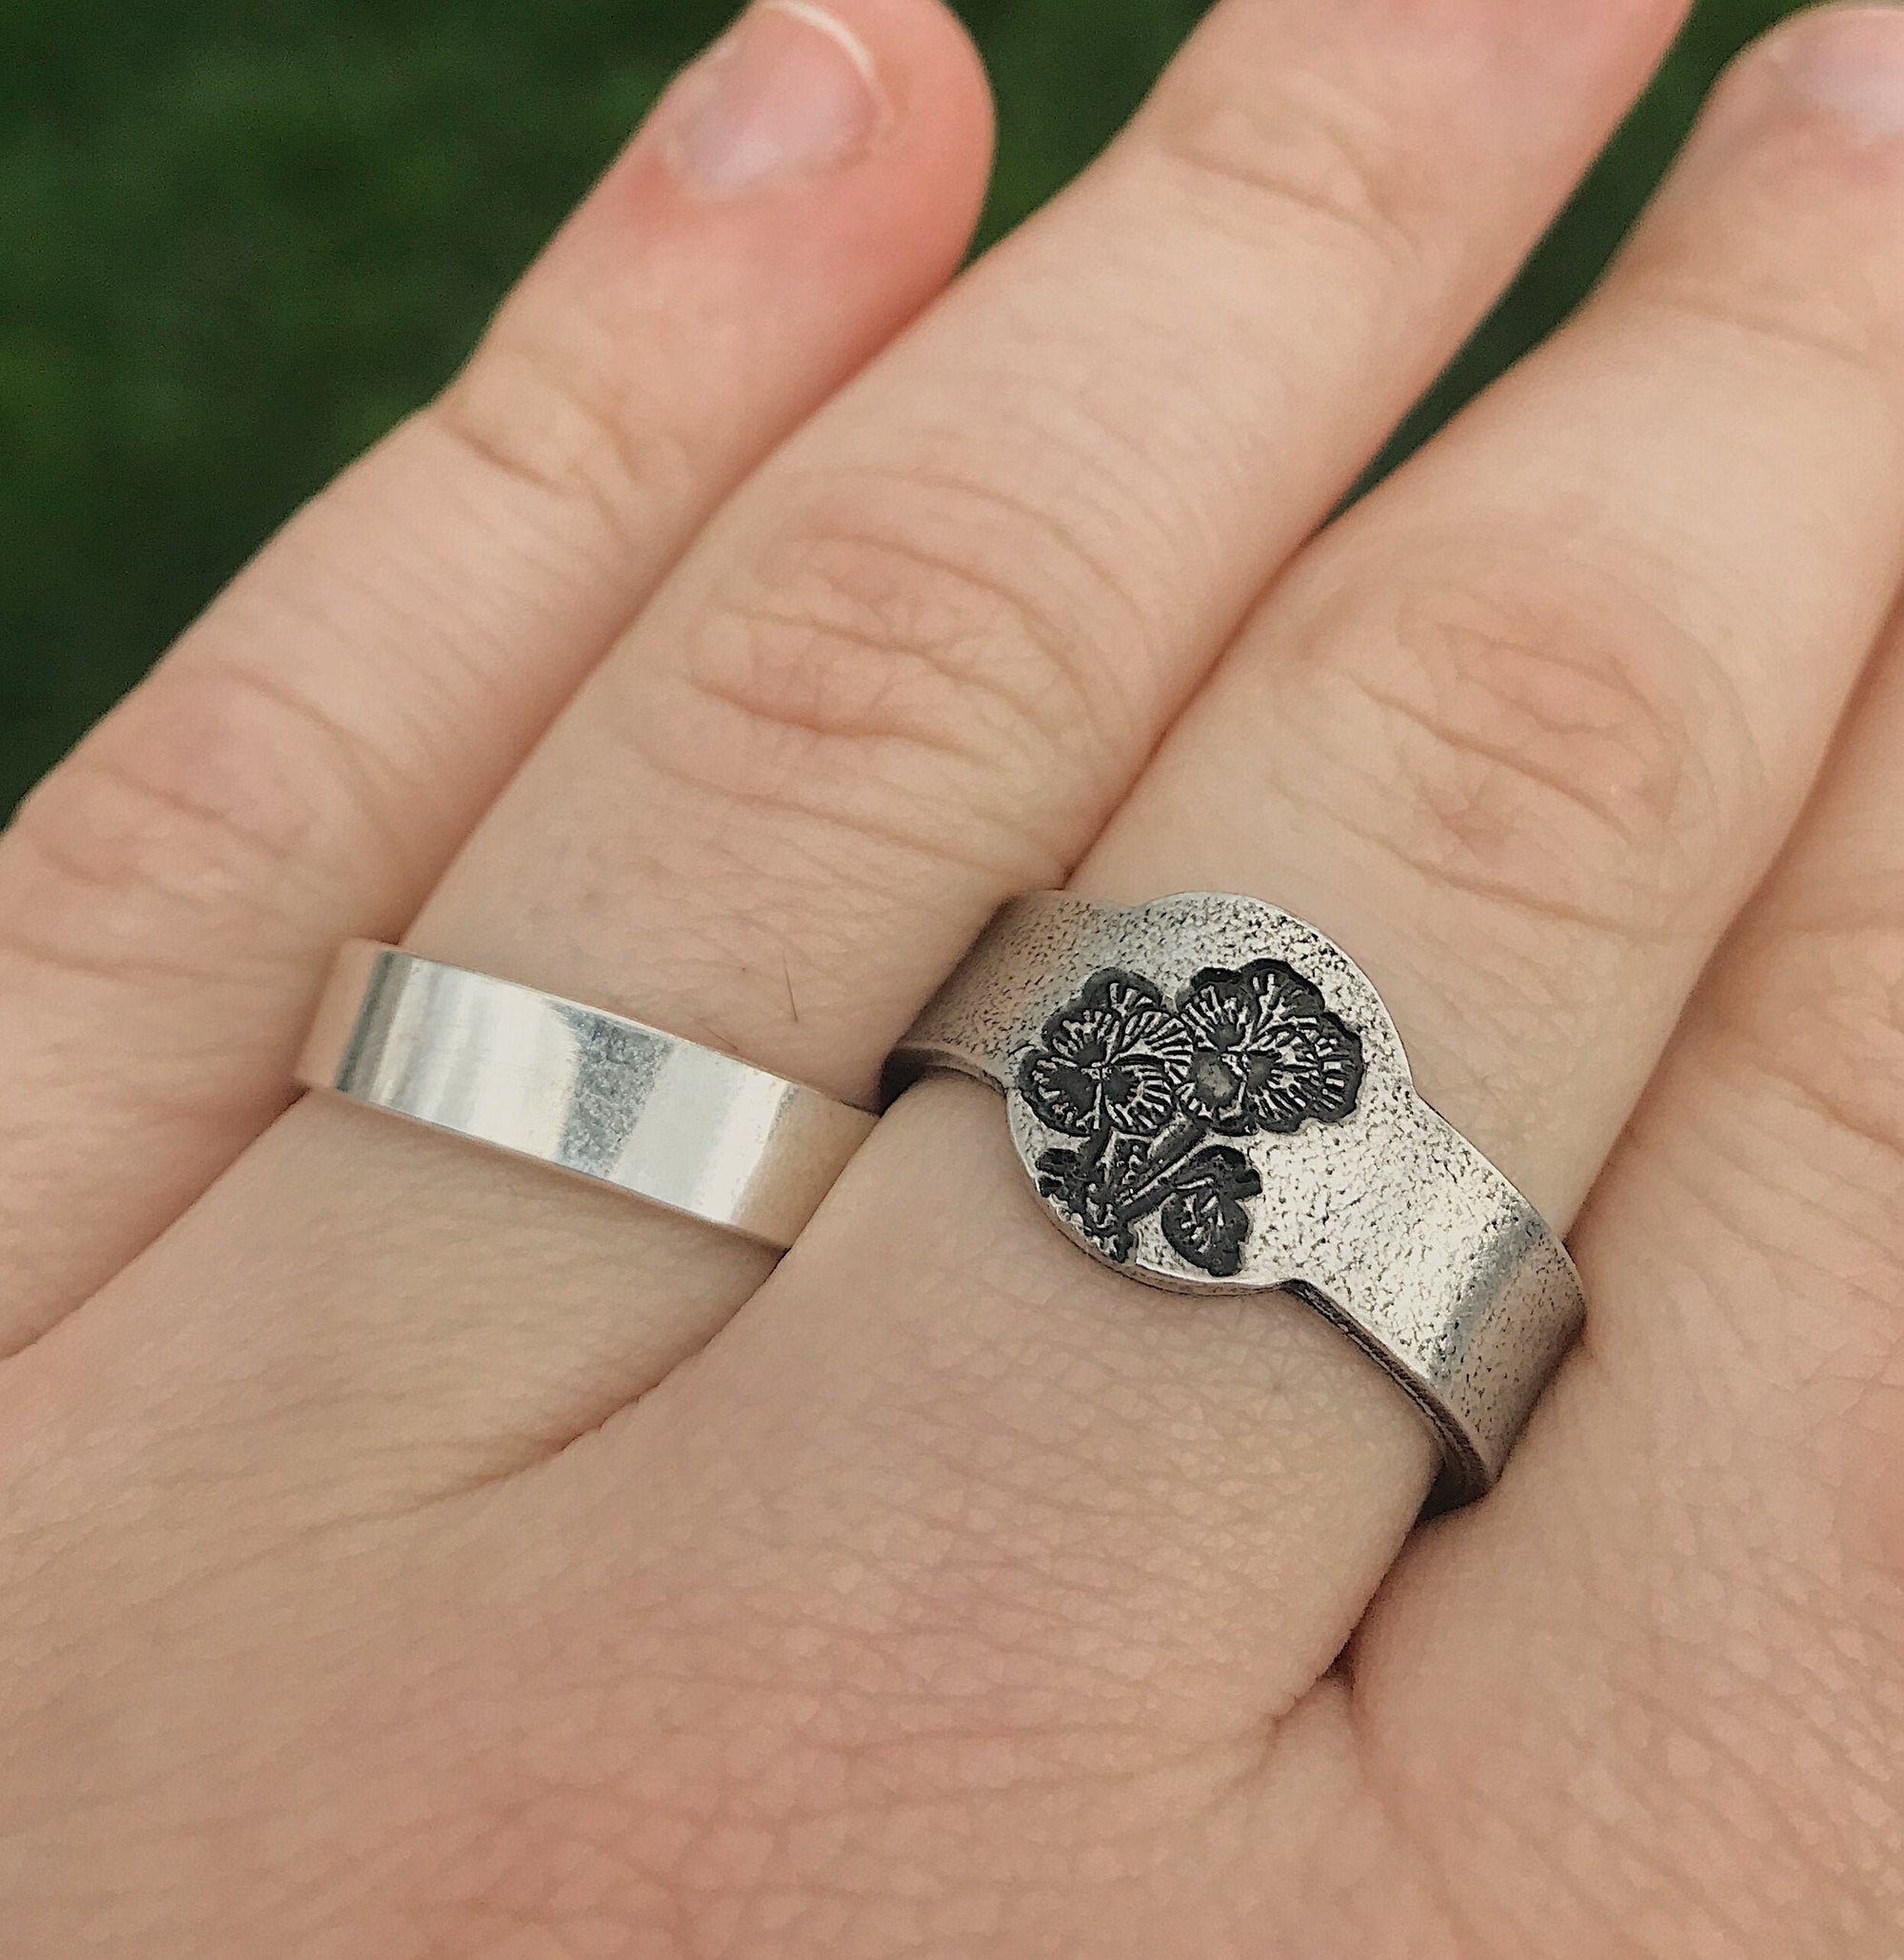 Pansy Floral Signet Ring | Pansy Jewelry | Rustic Birth Flower Ring | Best Friend Birthday Gifts | Mother's Day Gift | Best Friend Ring